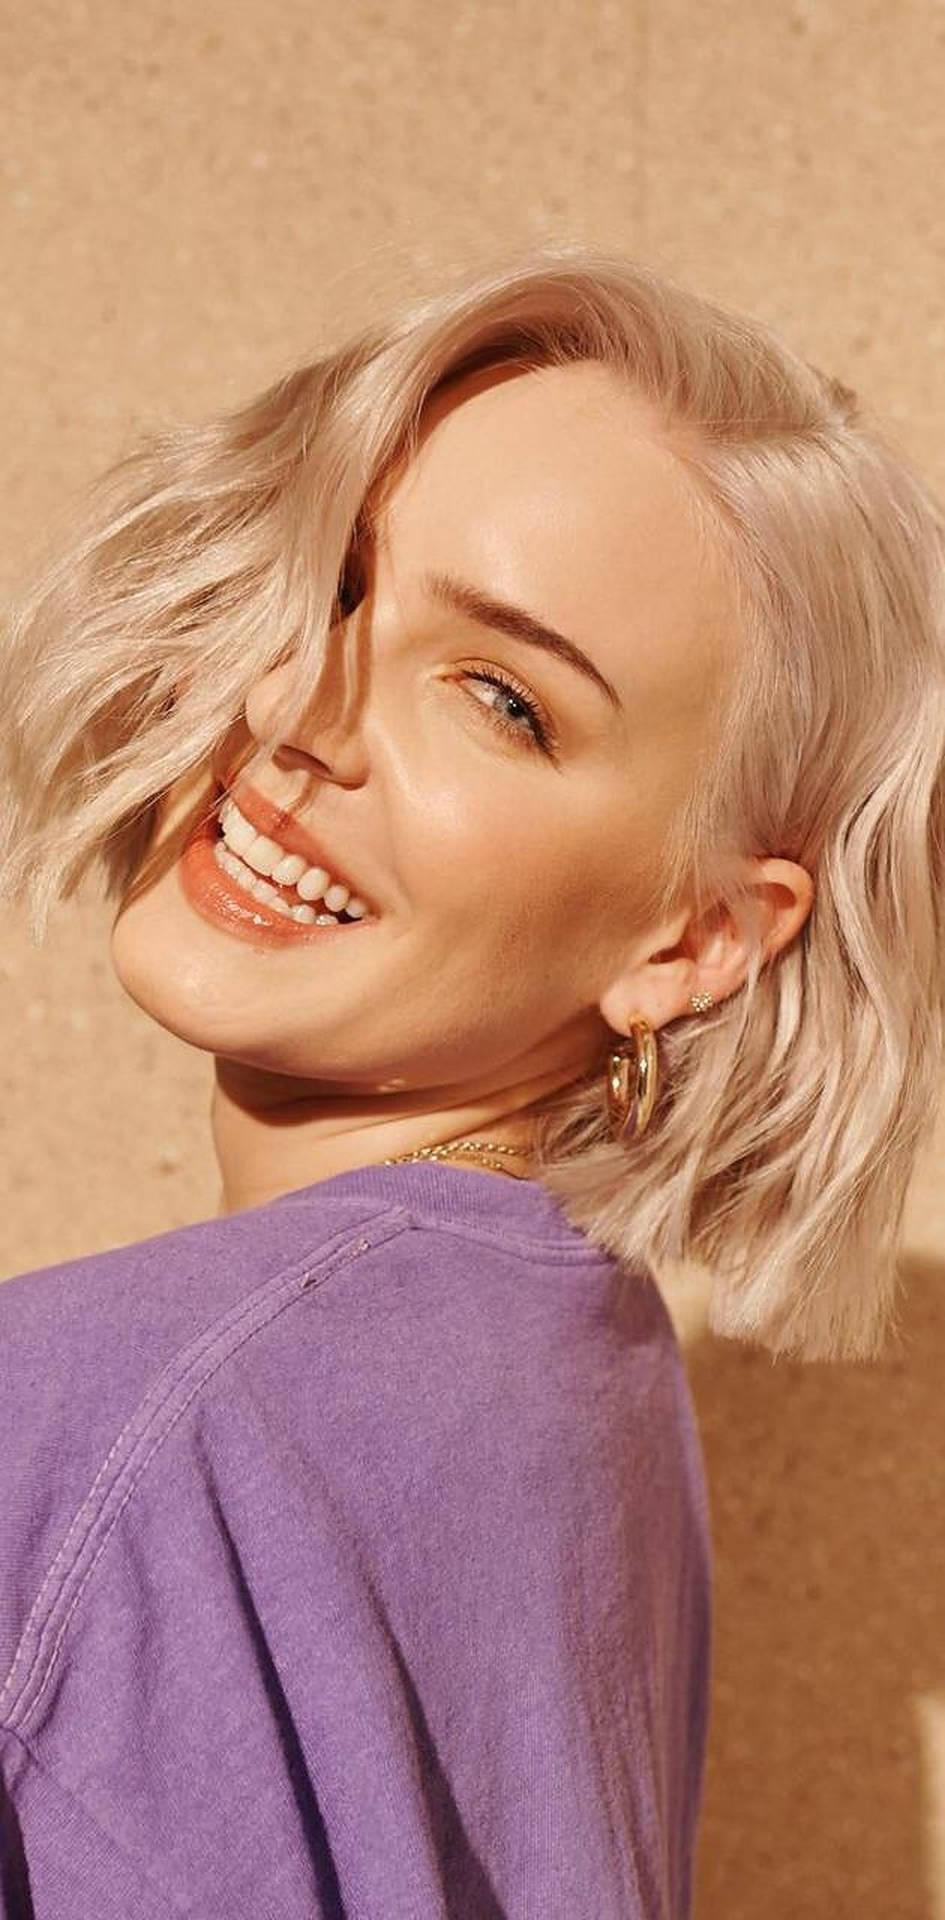 Anne-marie Smiling Background